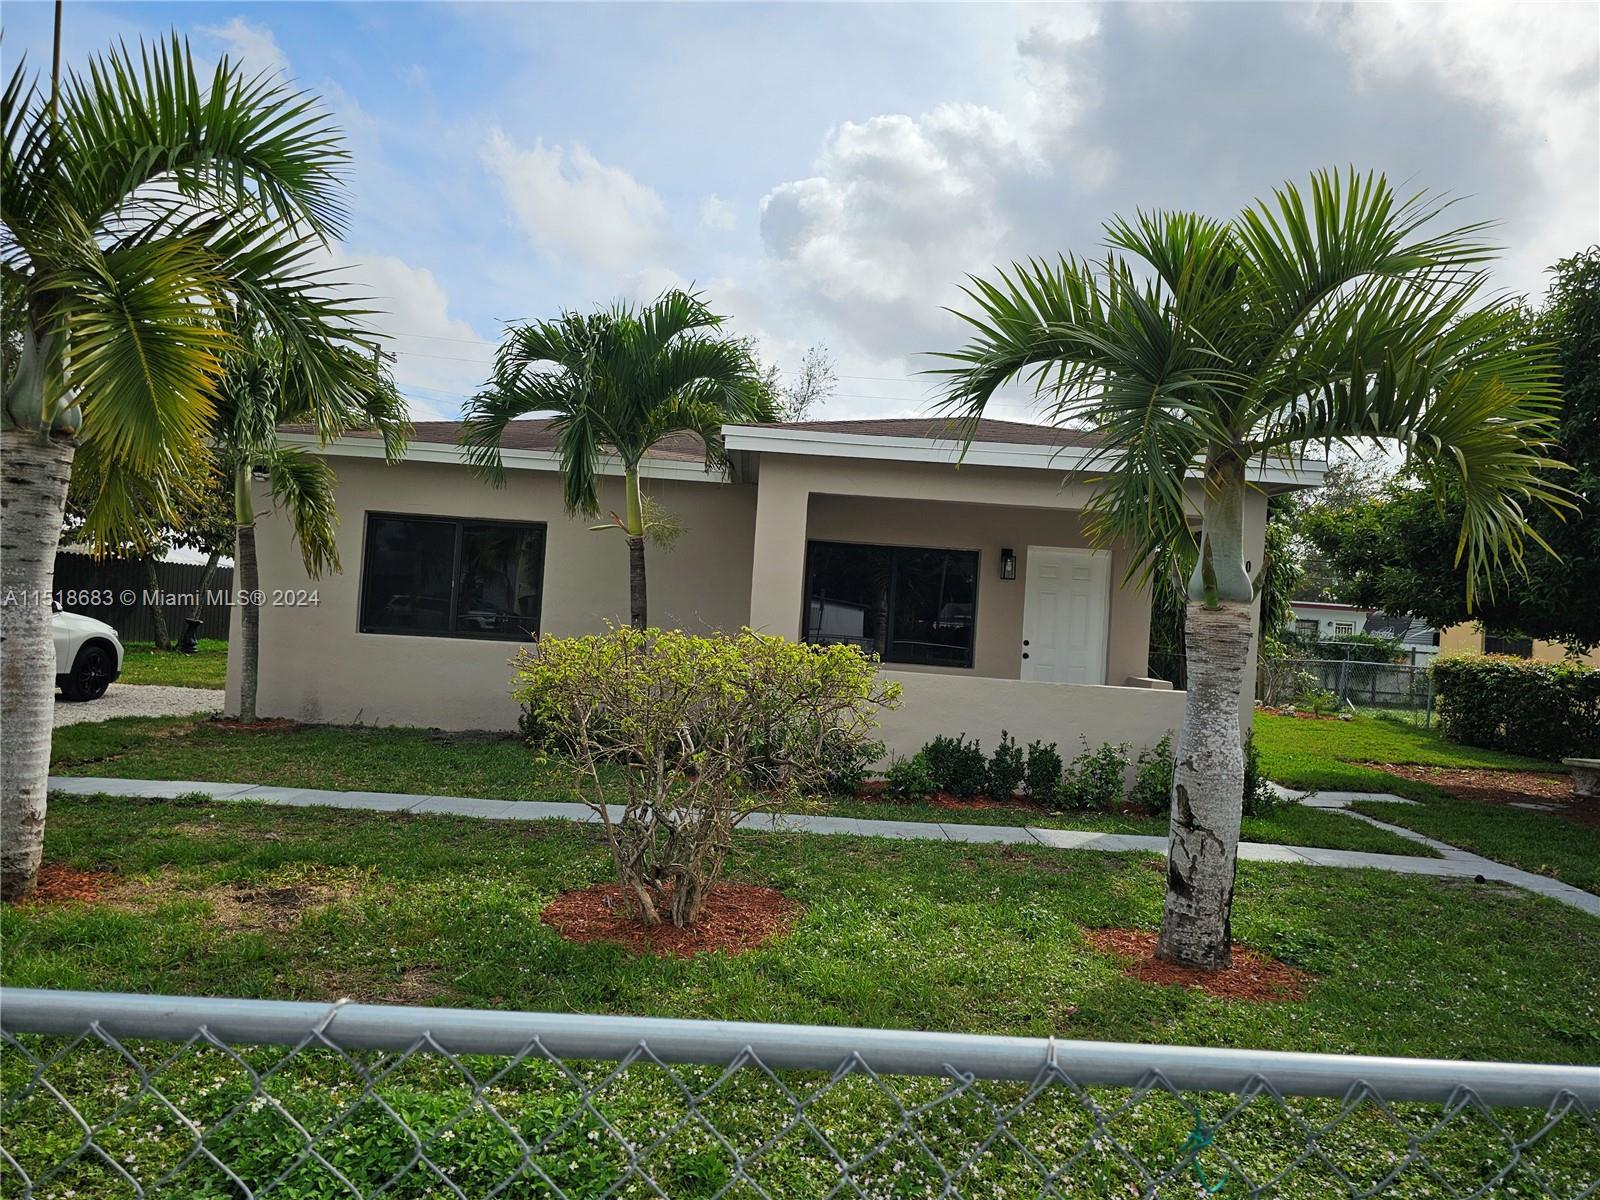 Photo of 2320 NW 95th St in Miami, FL